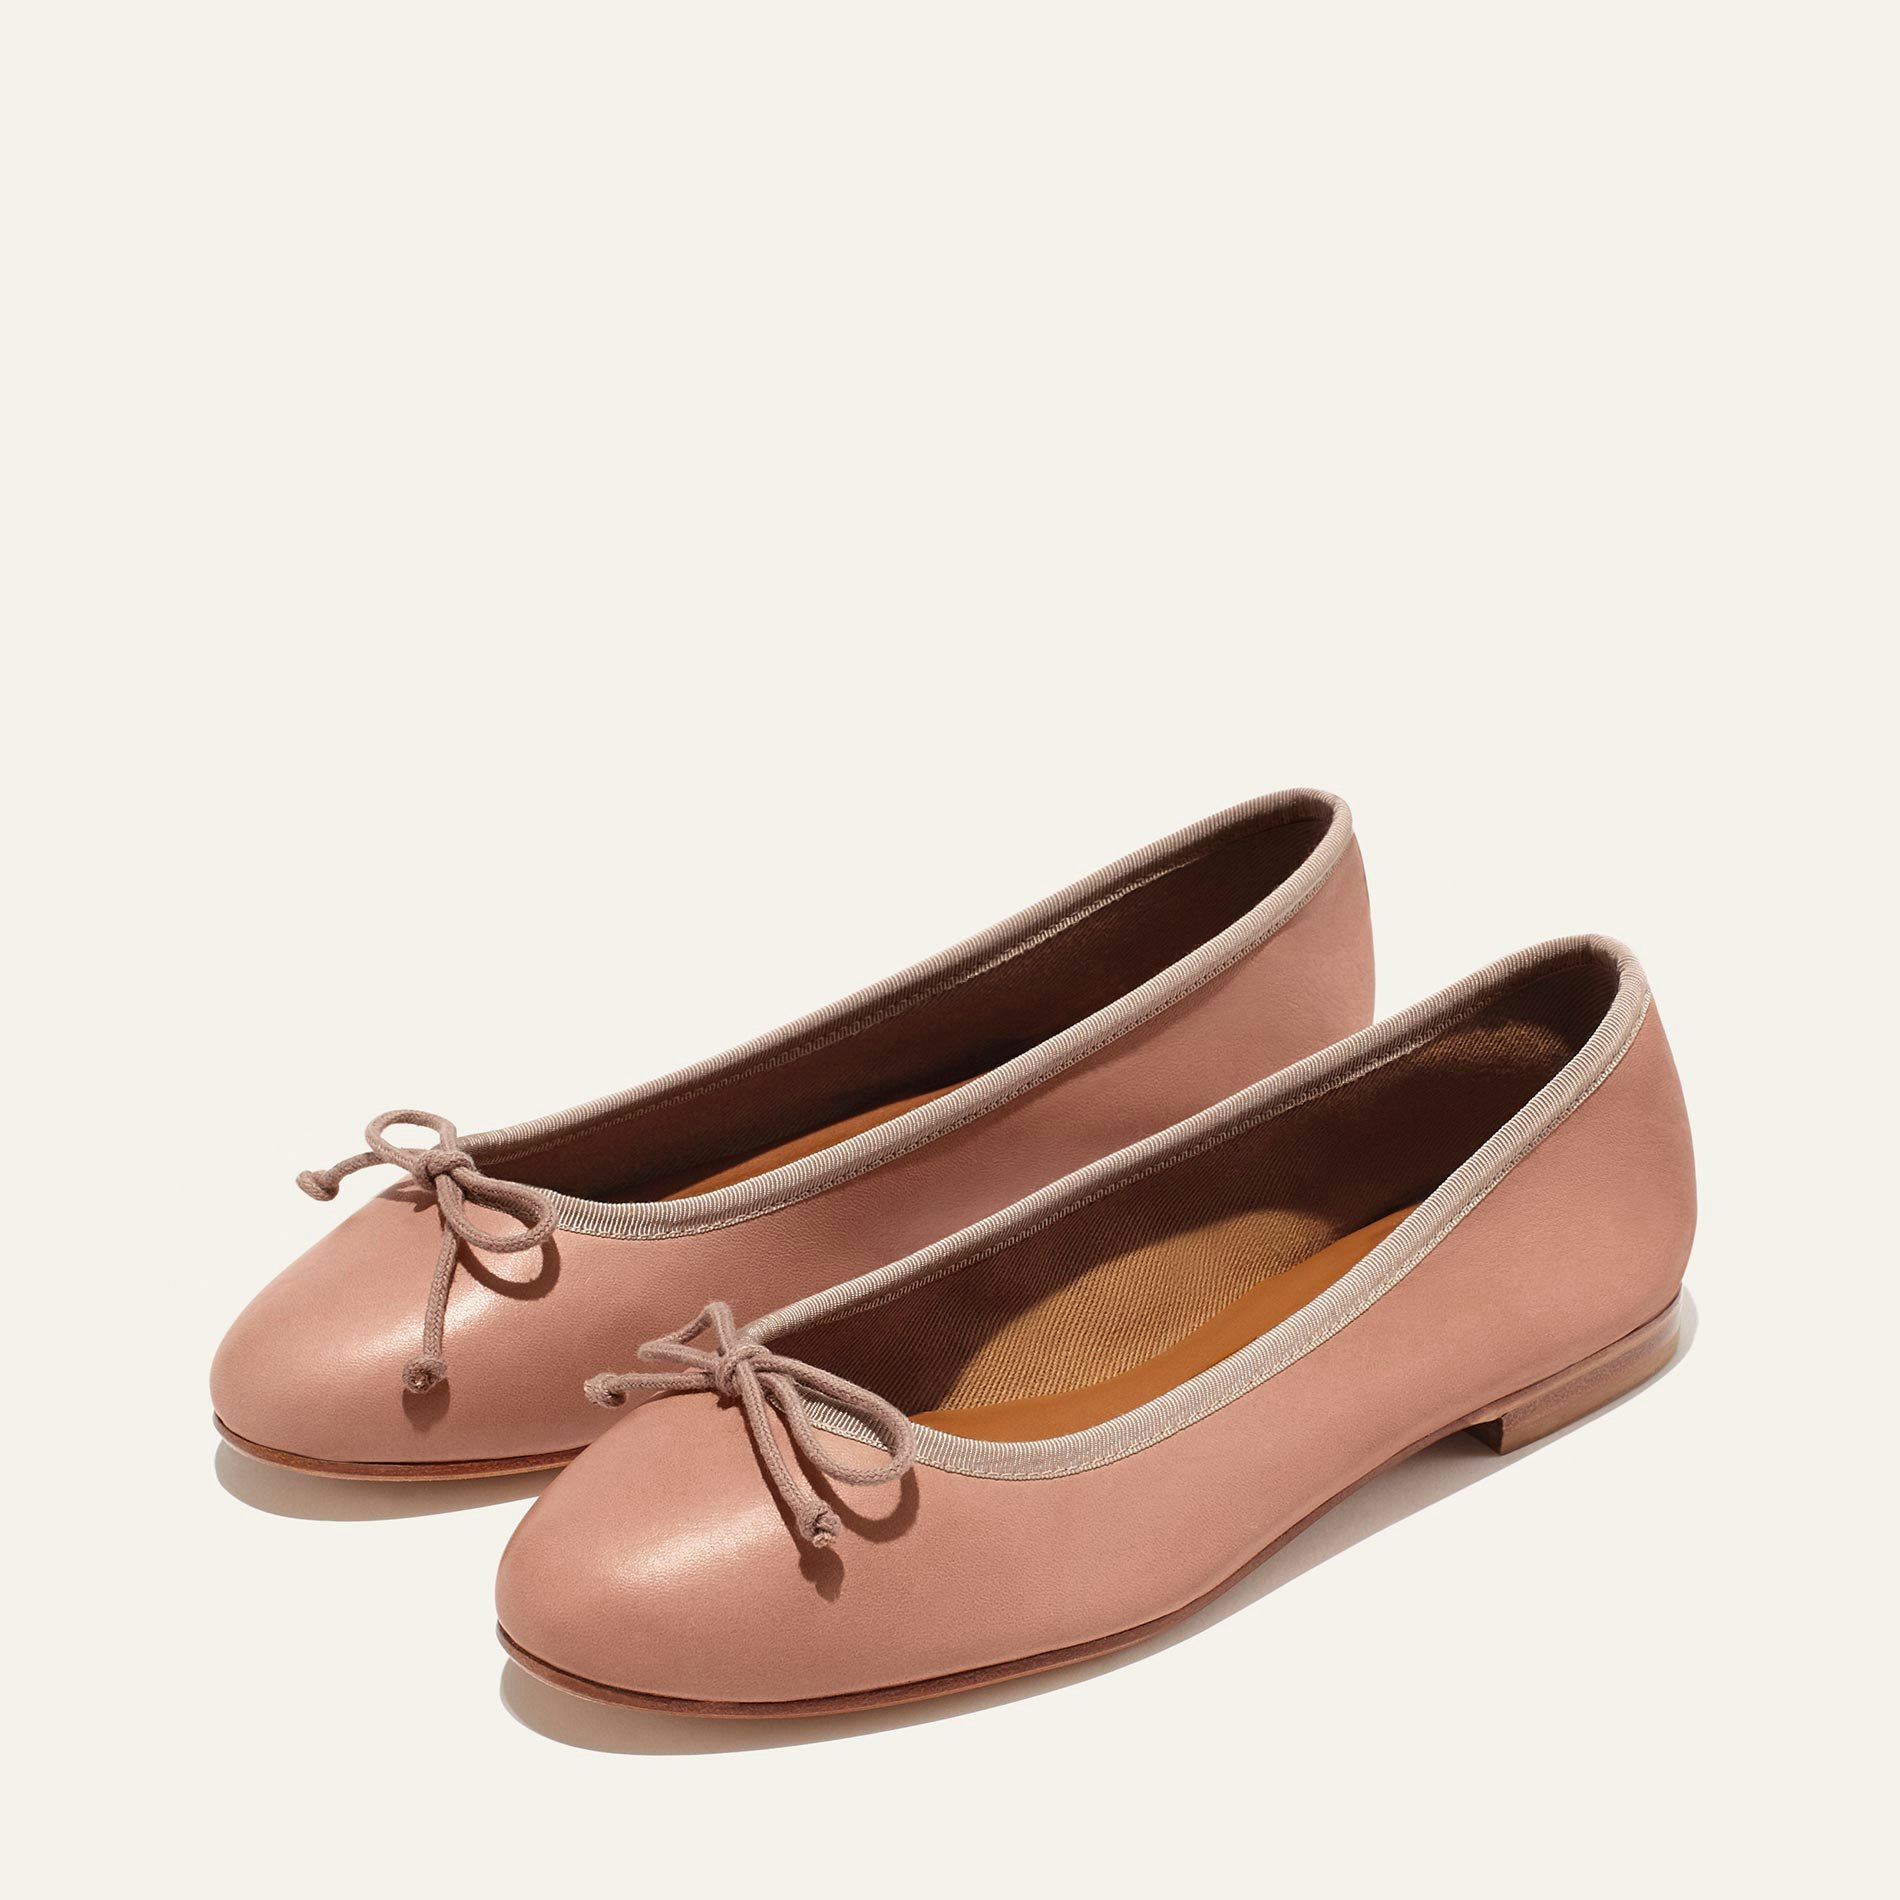 Classic Ballet Flats Are Back In A Surprising Way